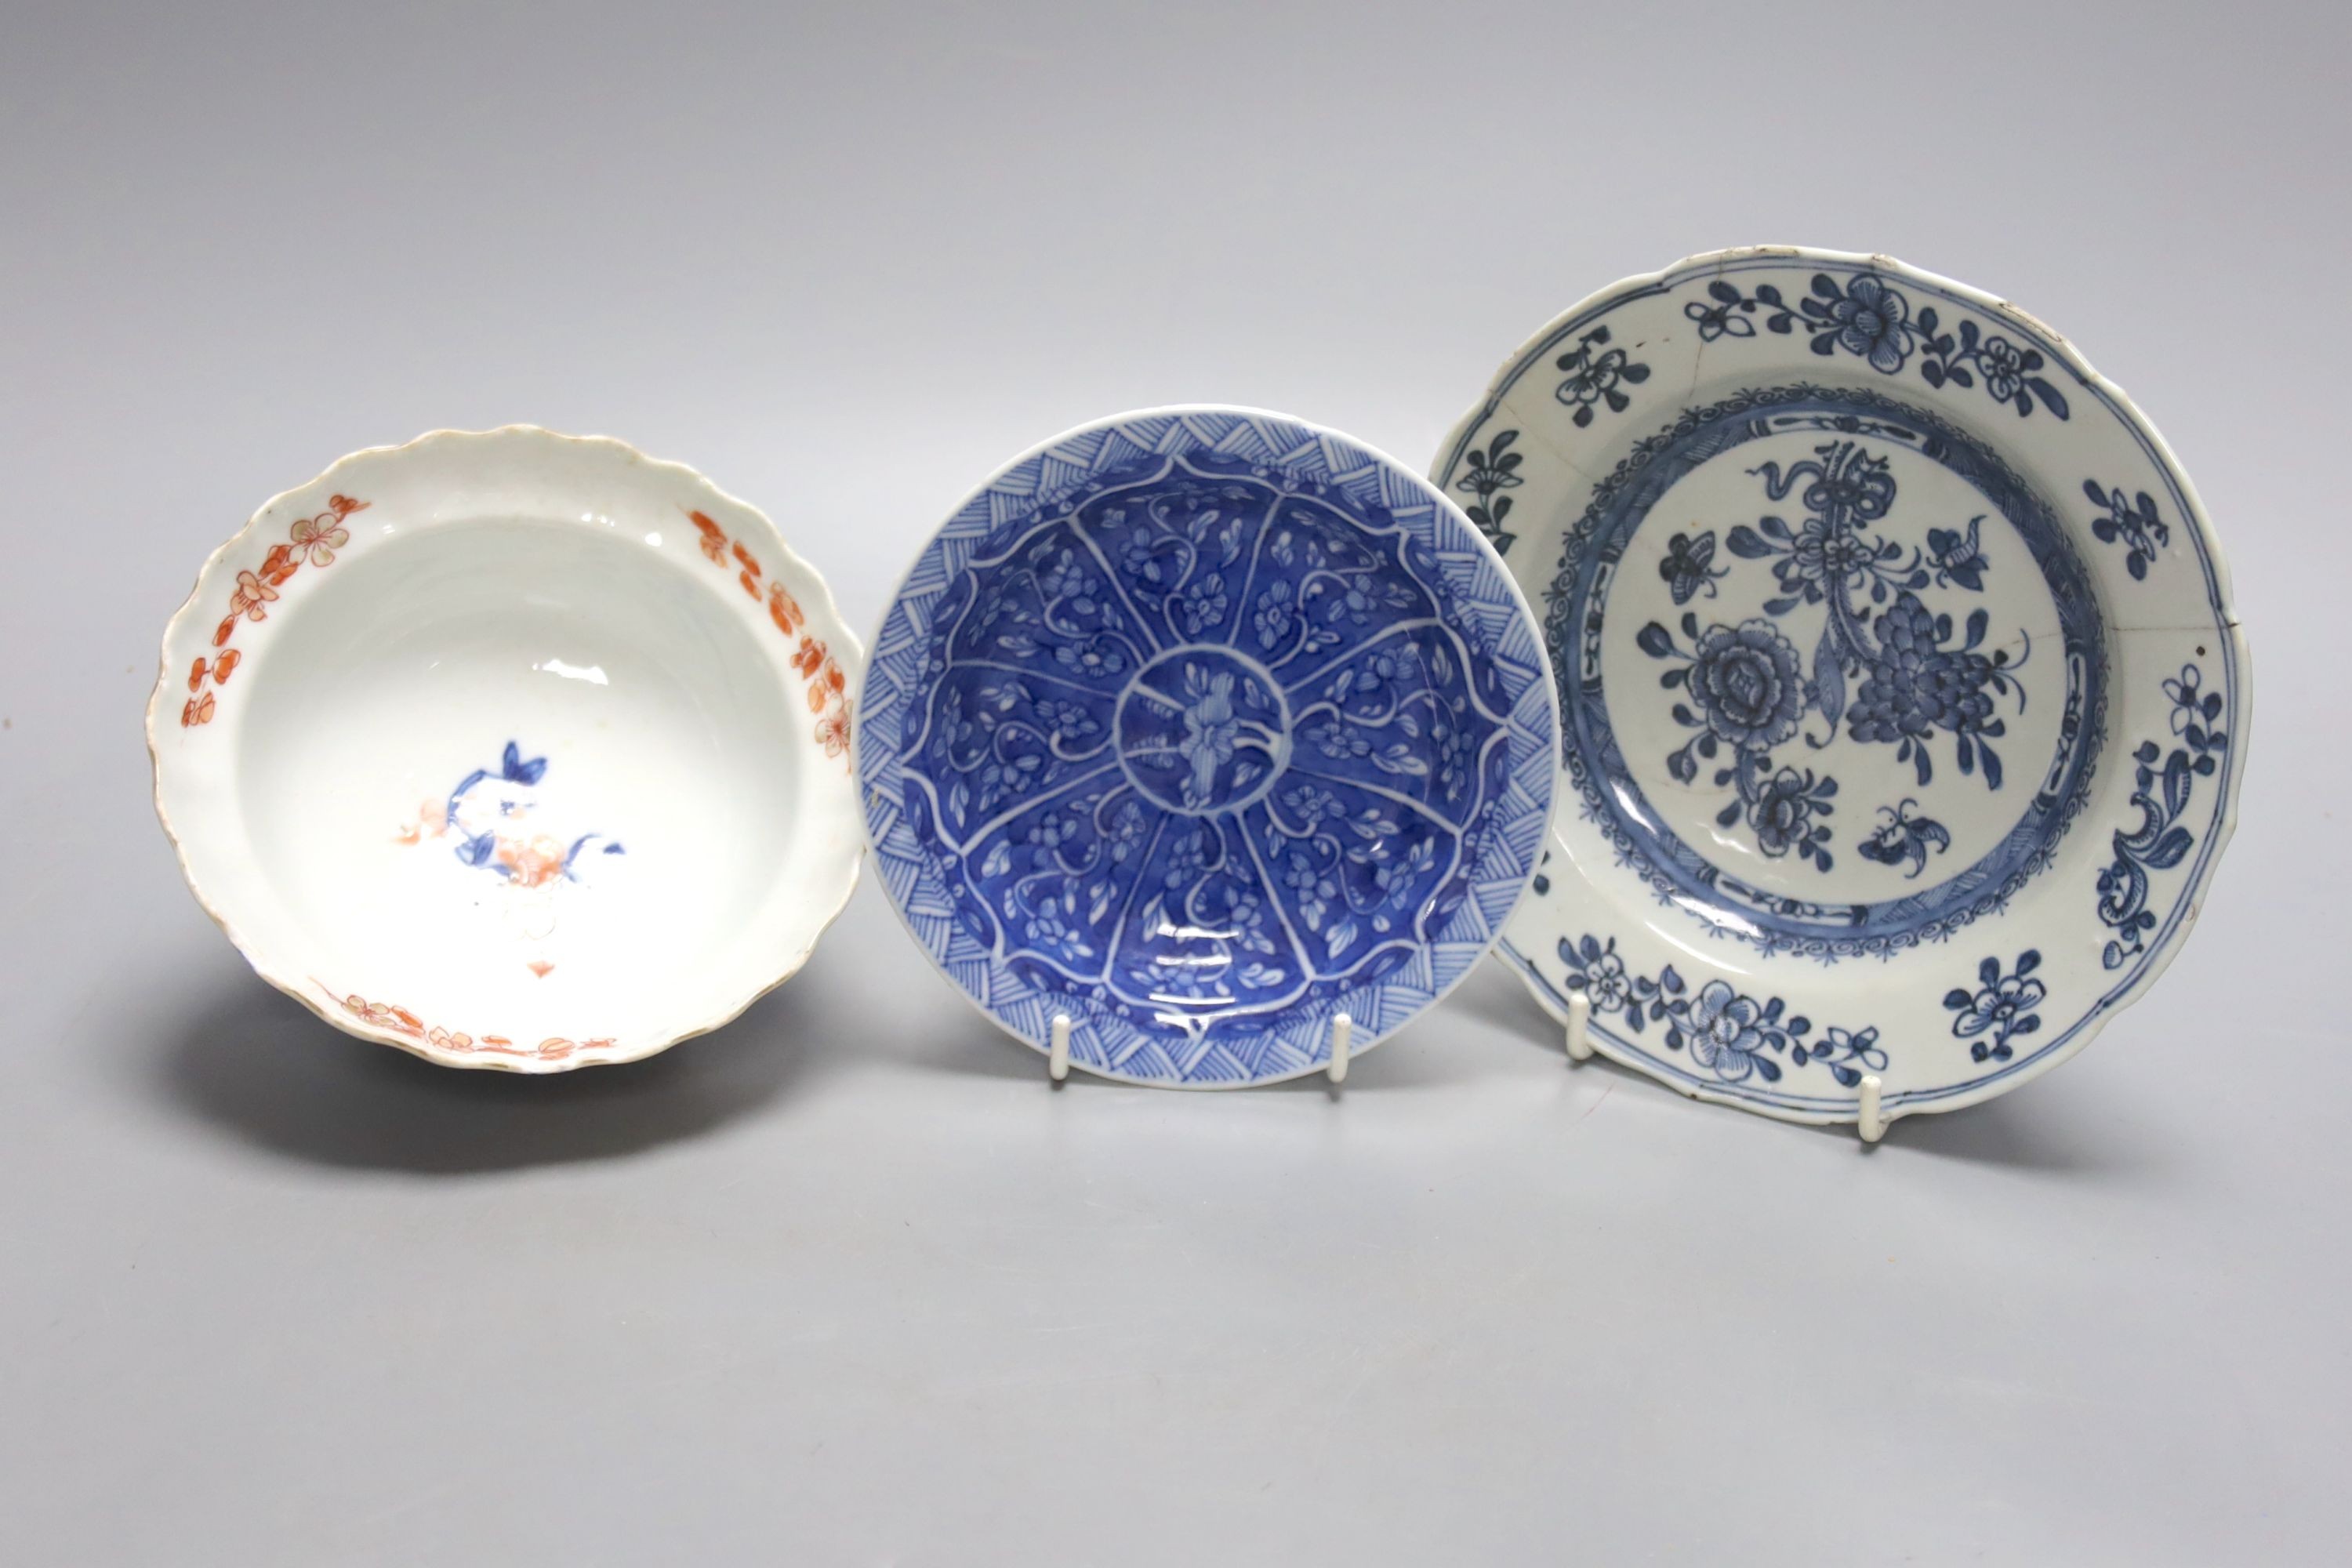 Two 18th century Chinese dishes and a bowl (3) 16.5cm